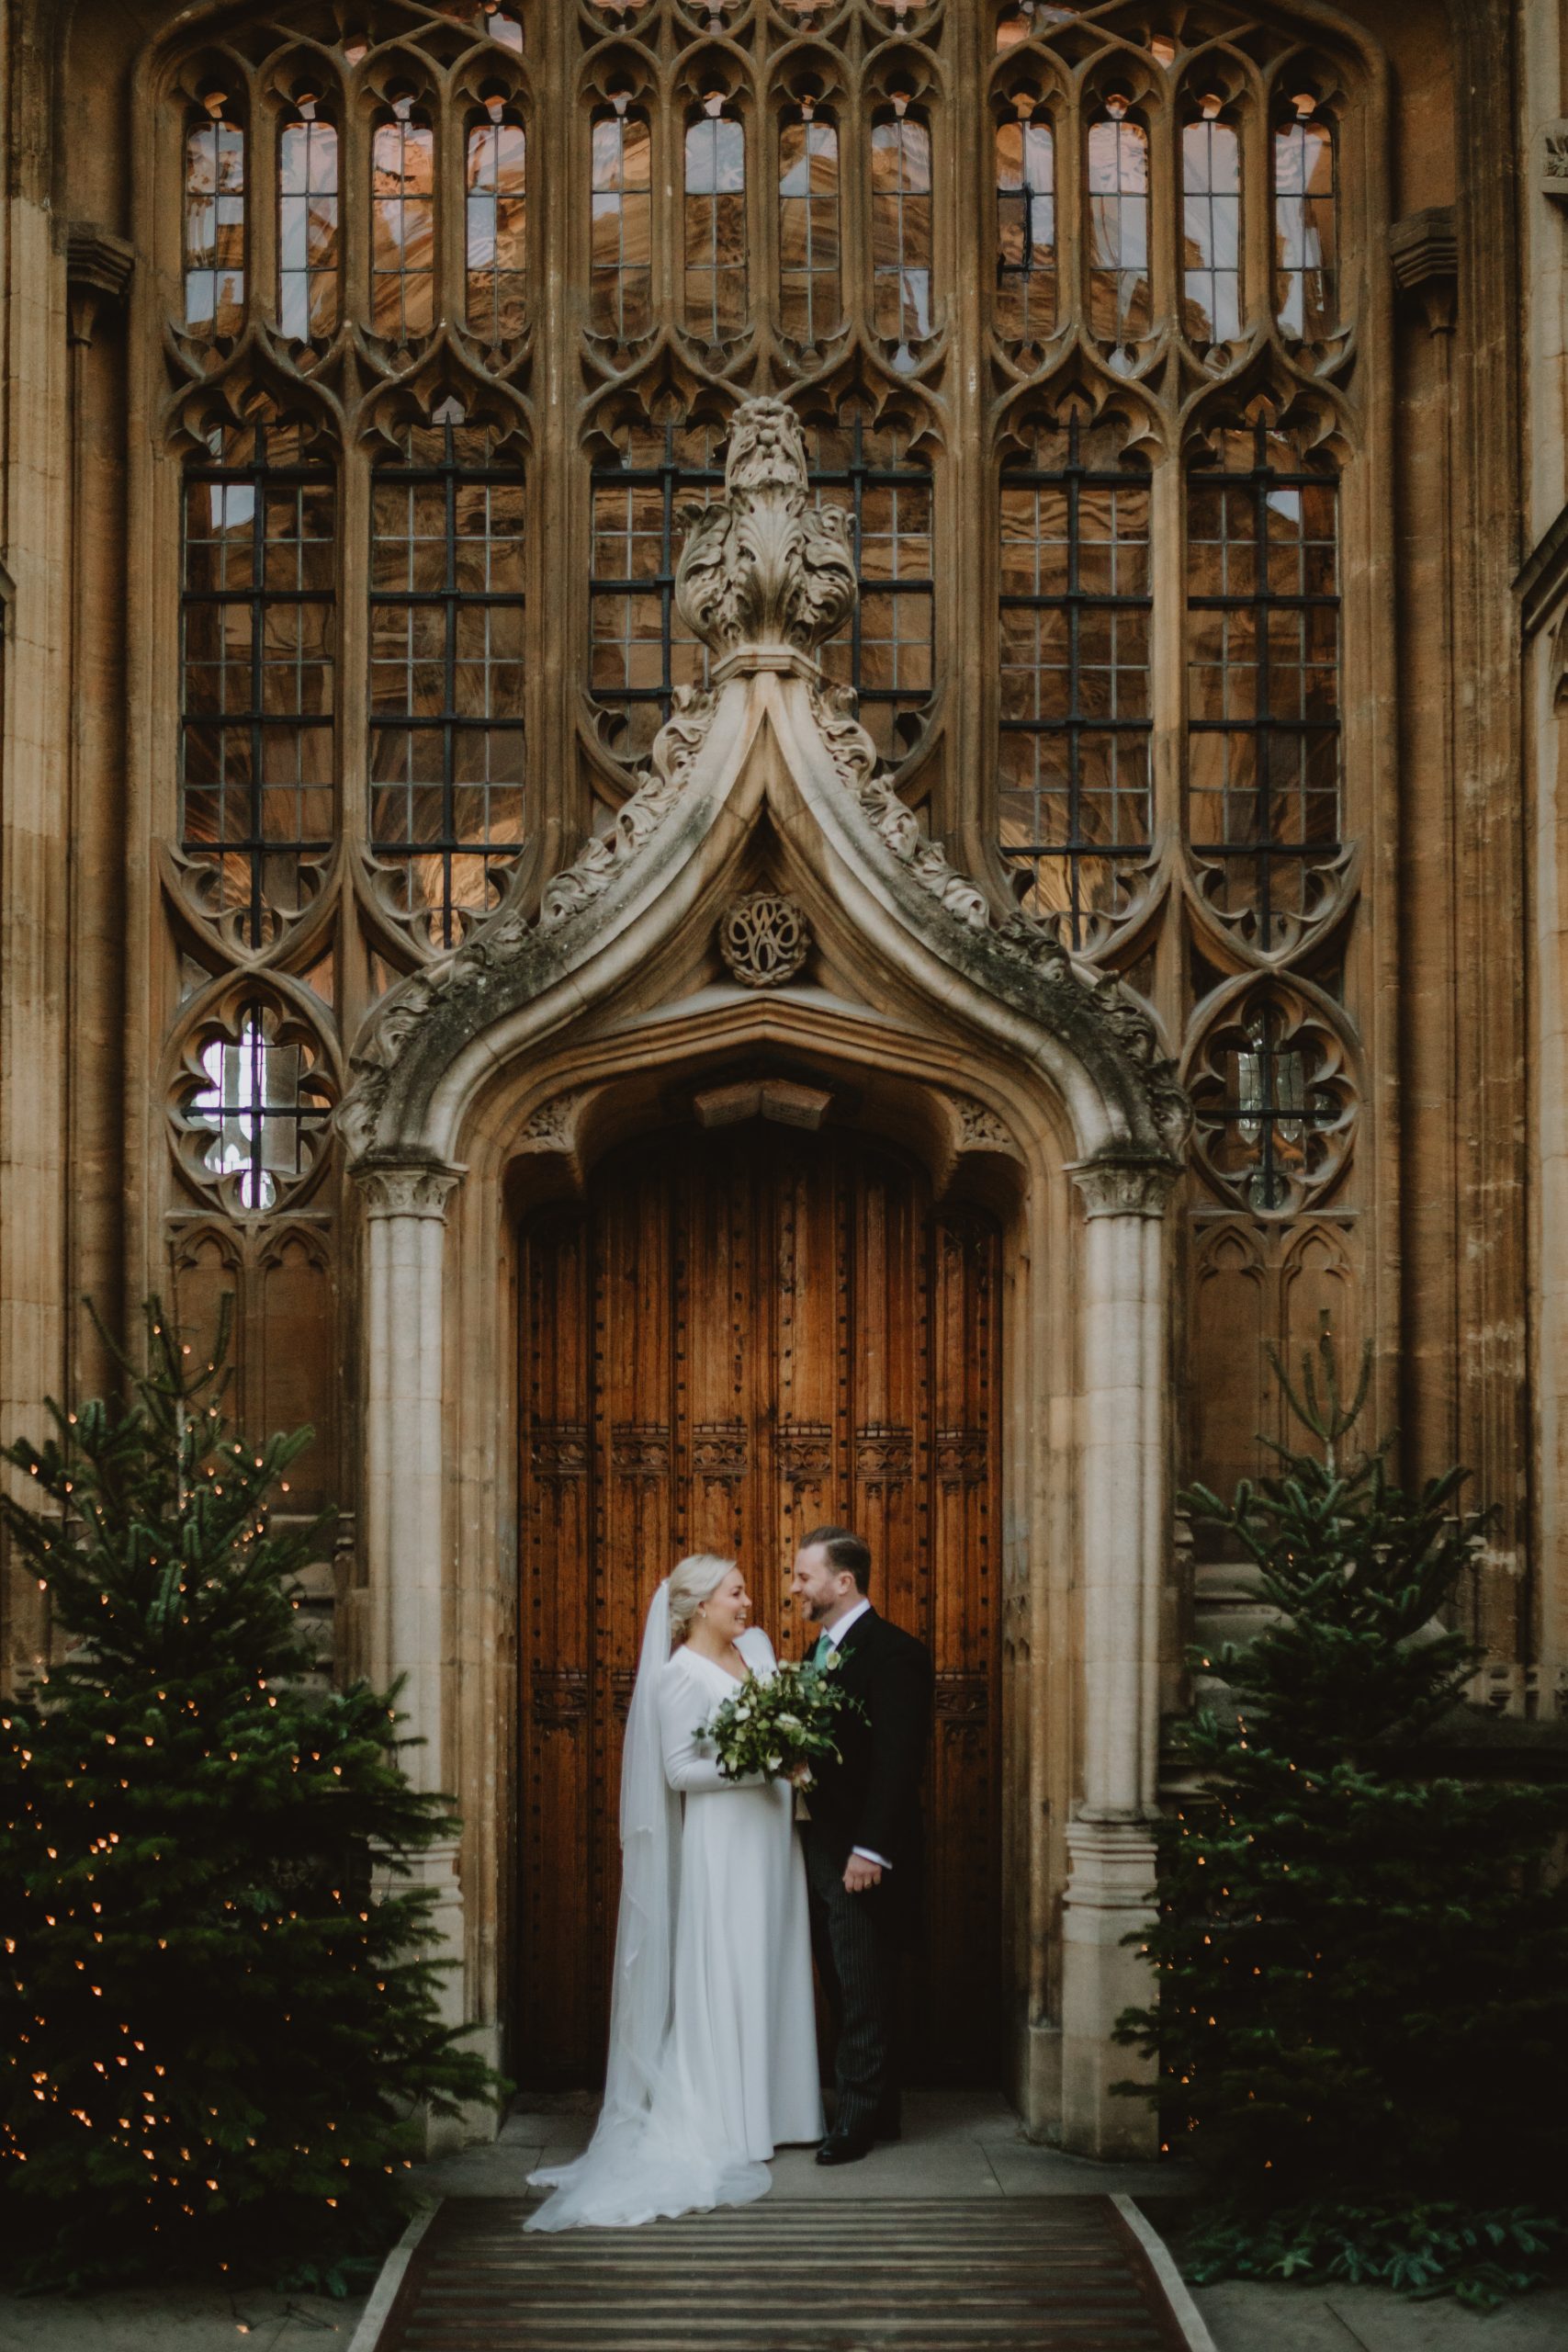 Wedding Couple stand in front of the Wren Door Divinity School Bodleian LIbrary with Christmas trees